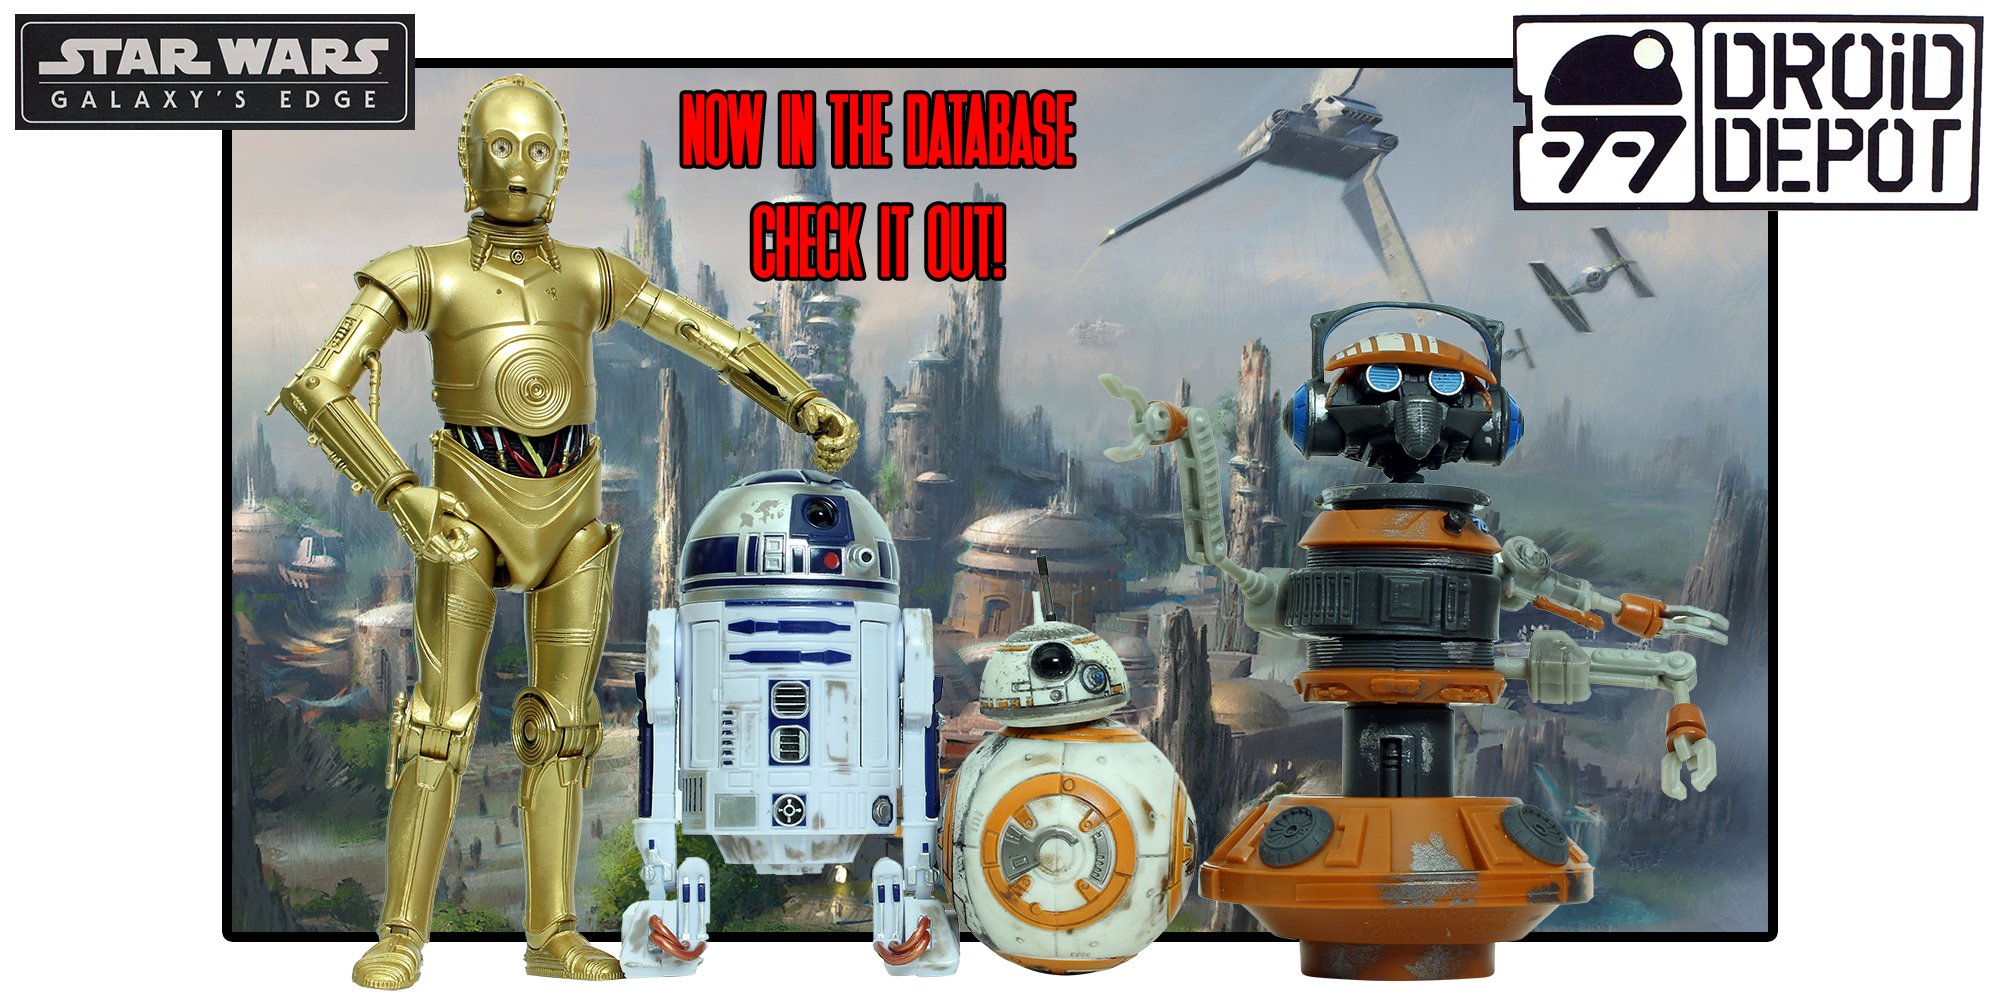 New Addition: Black Series 6" Droid Depot 4-Pack